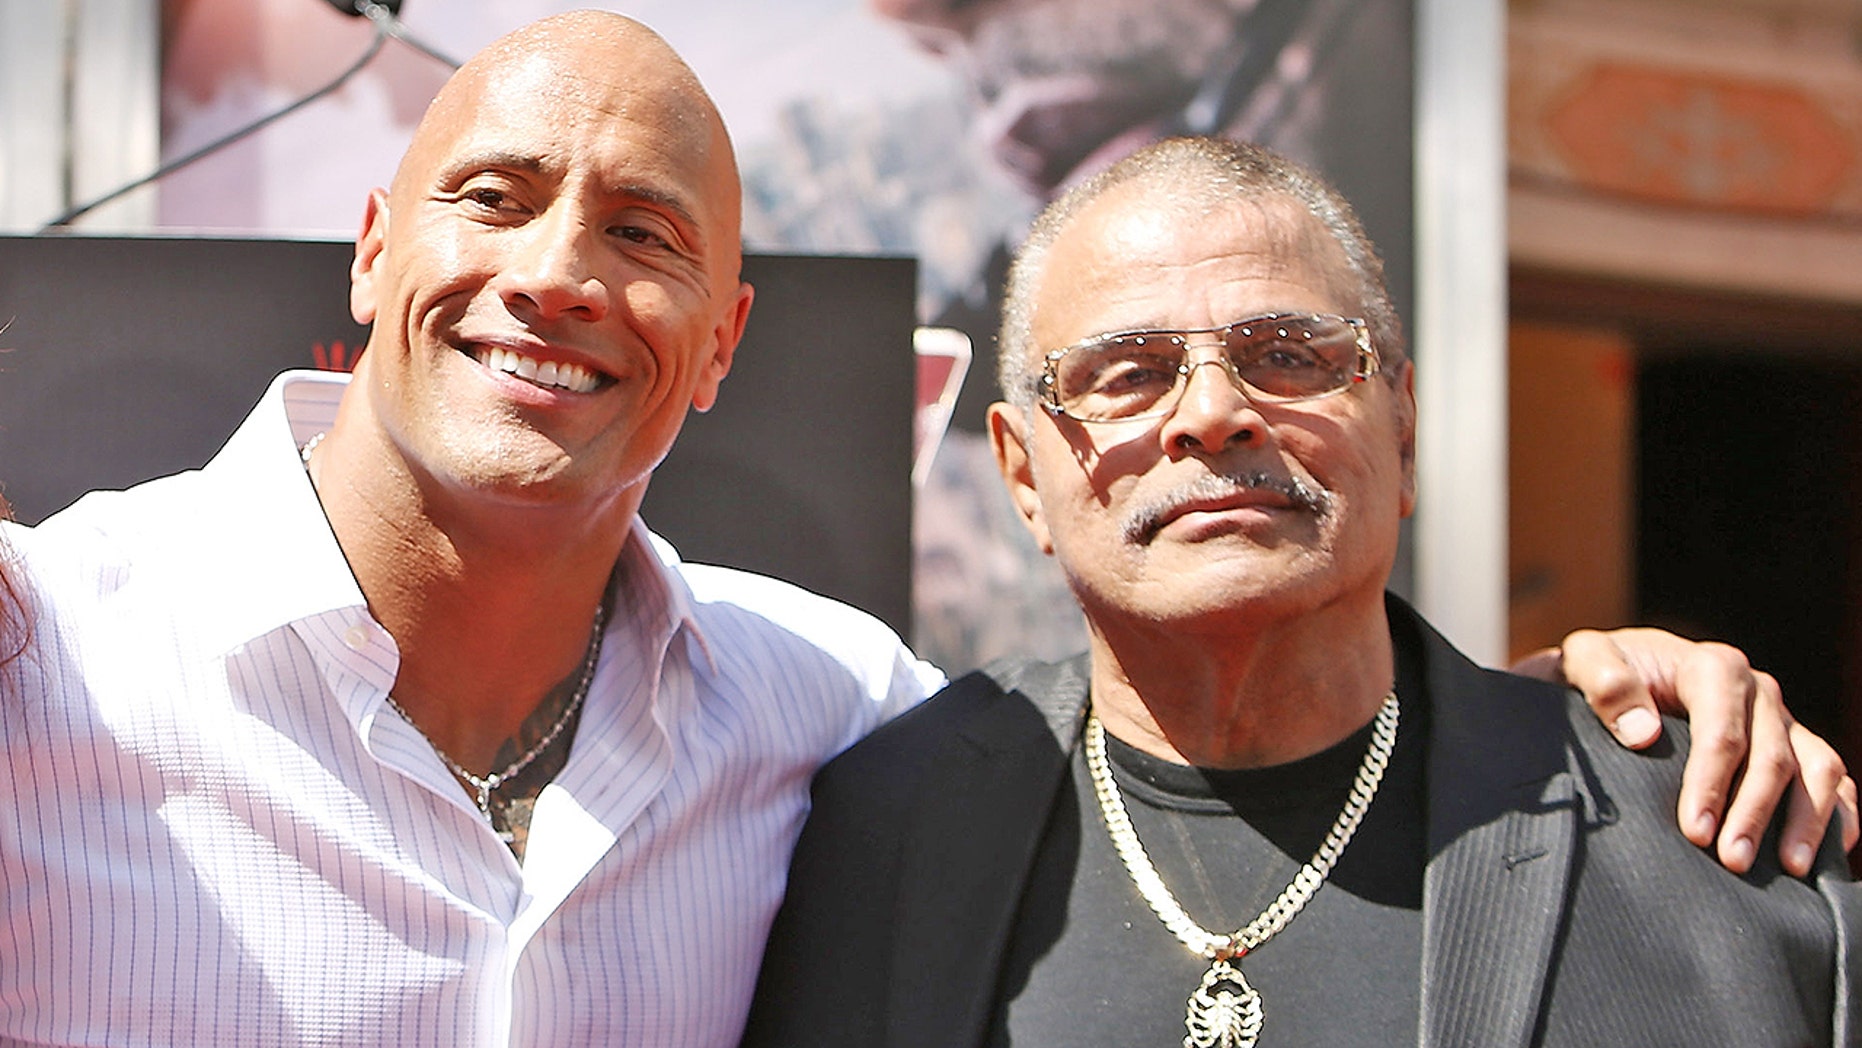 Dwayne The Rock Johnson Buys His Father A New House Fox News